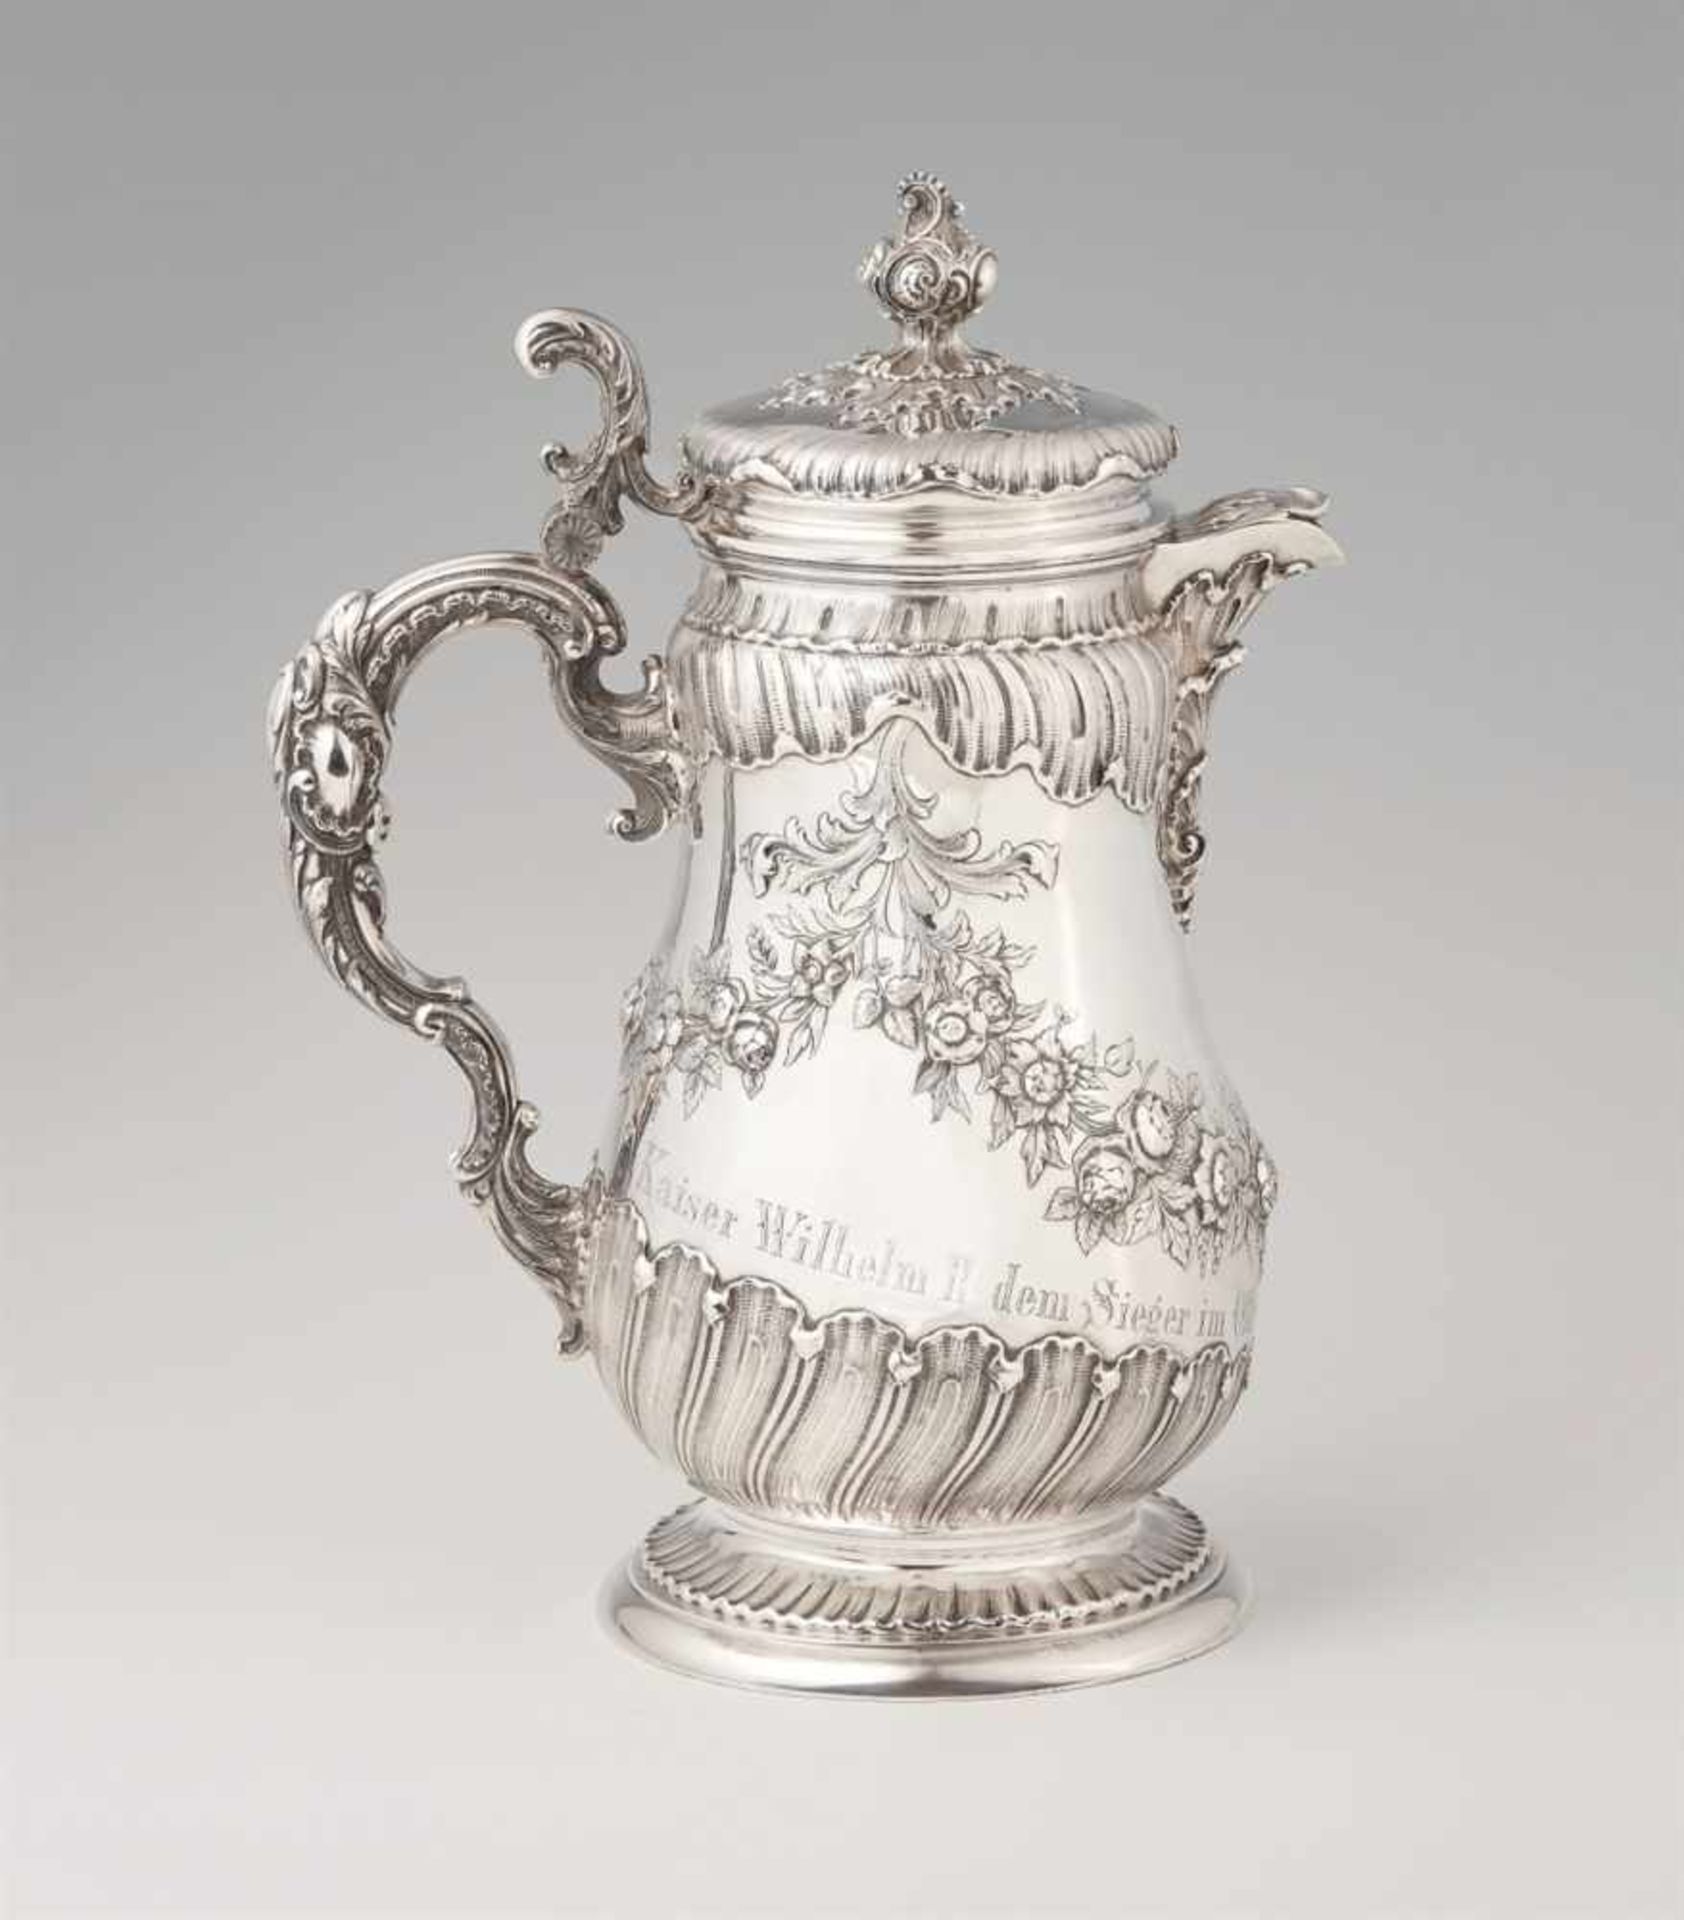 A Berlin silver horse racing trophyA large pear-form pitcher with slip lid, engraved "Kaiser Wilhelm - Bild 3 aus 11